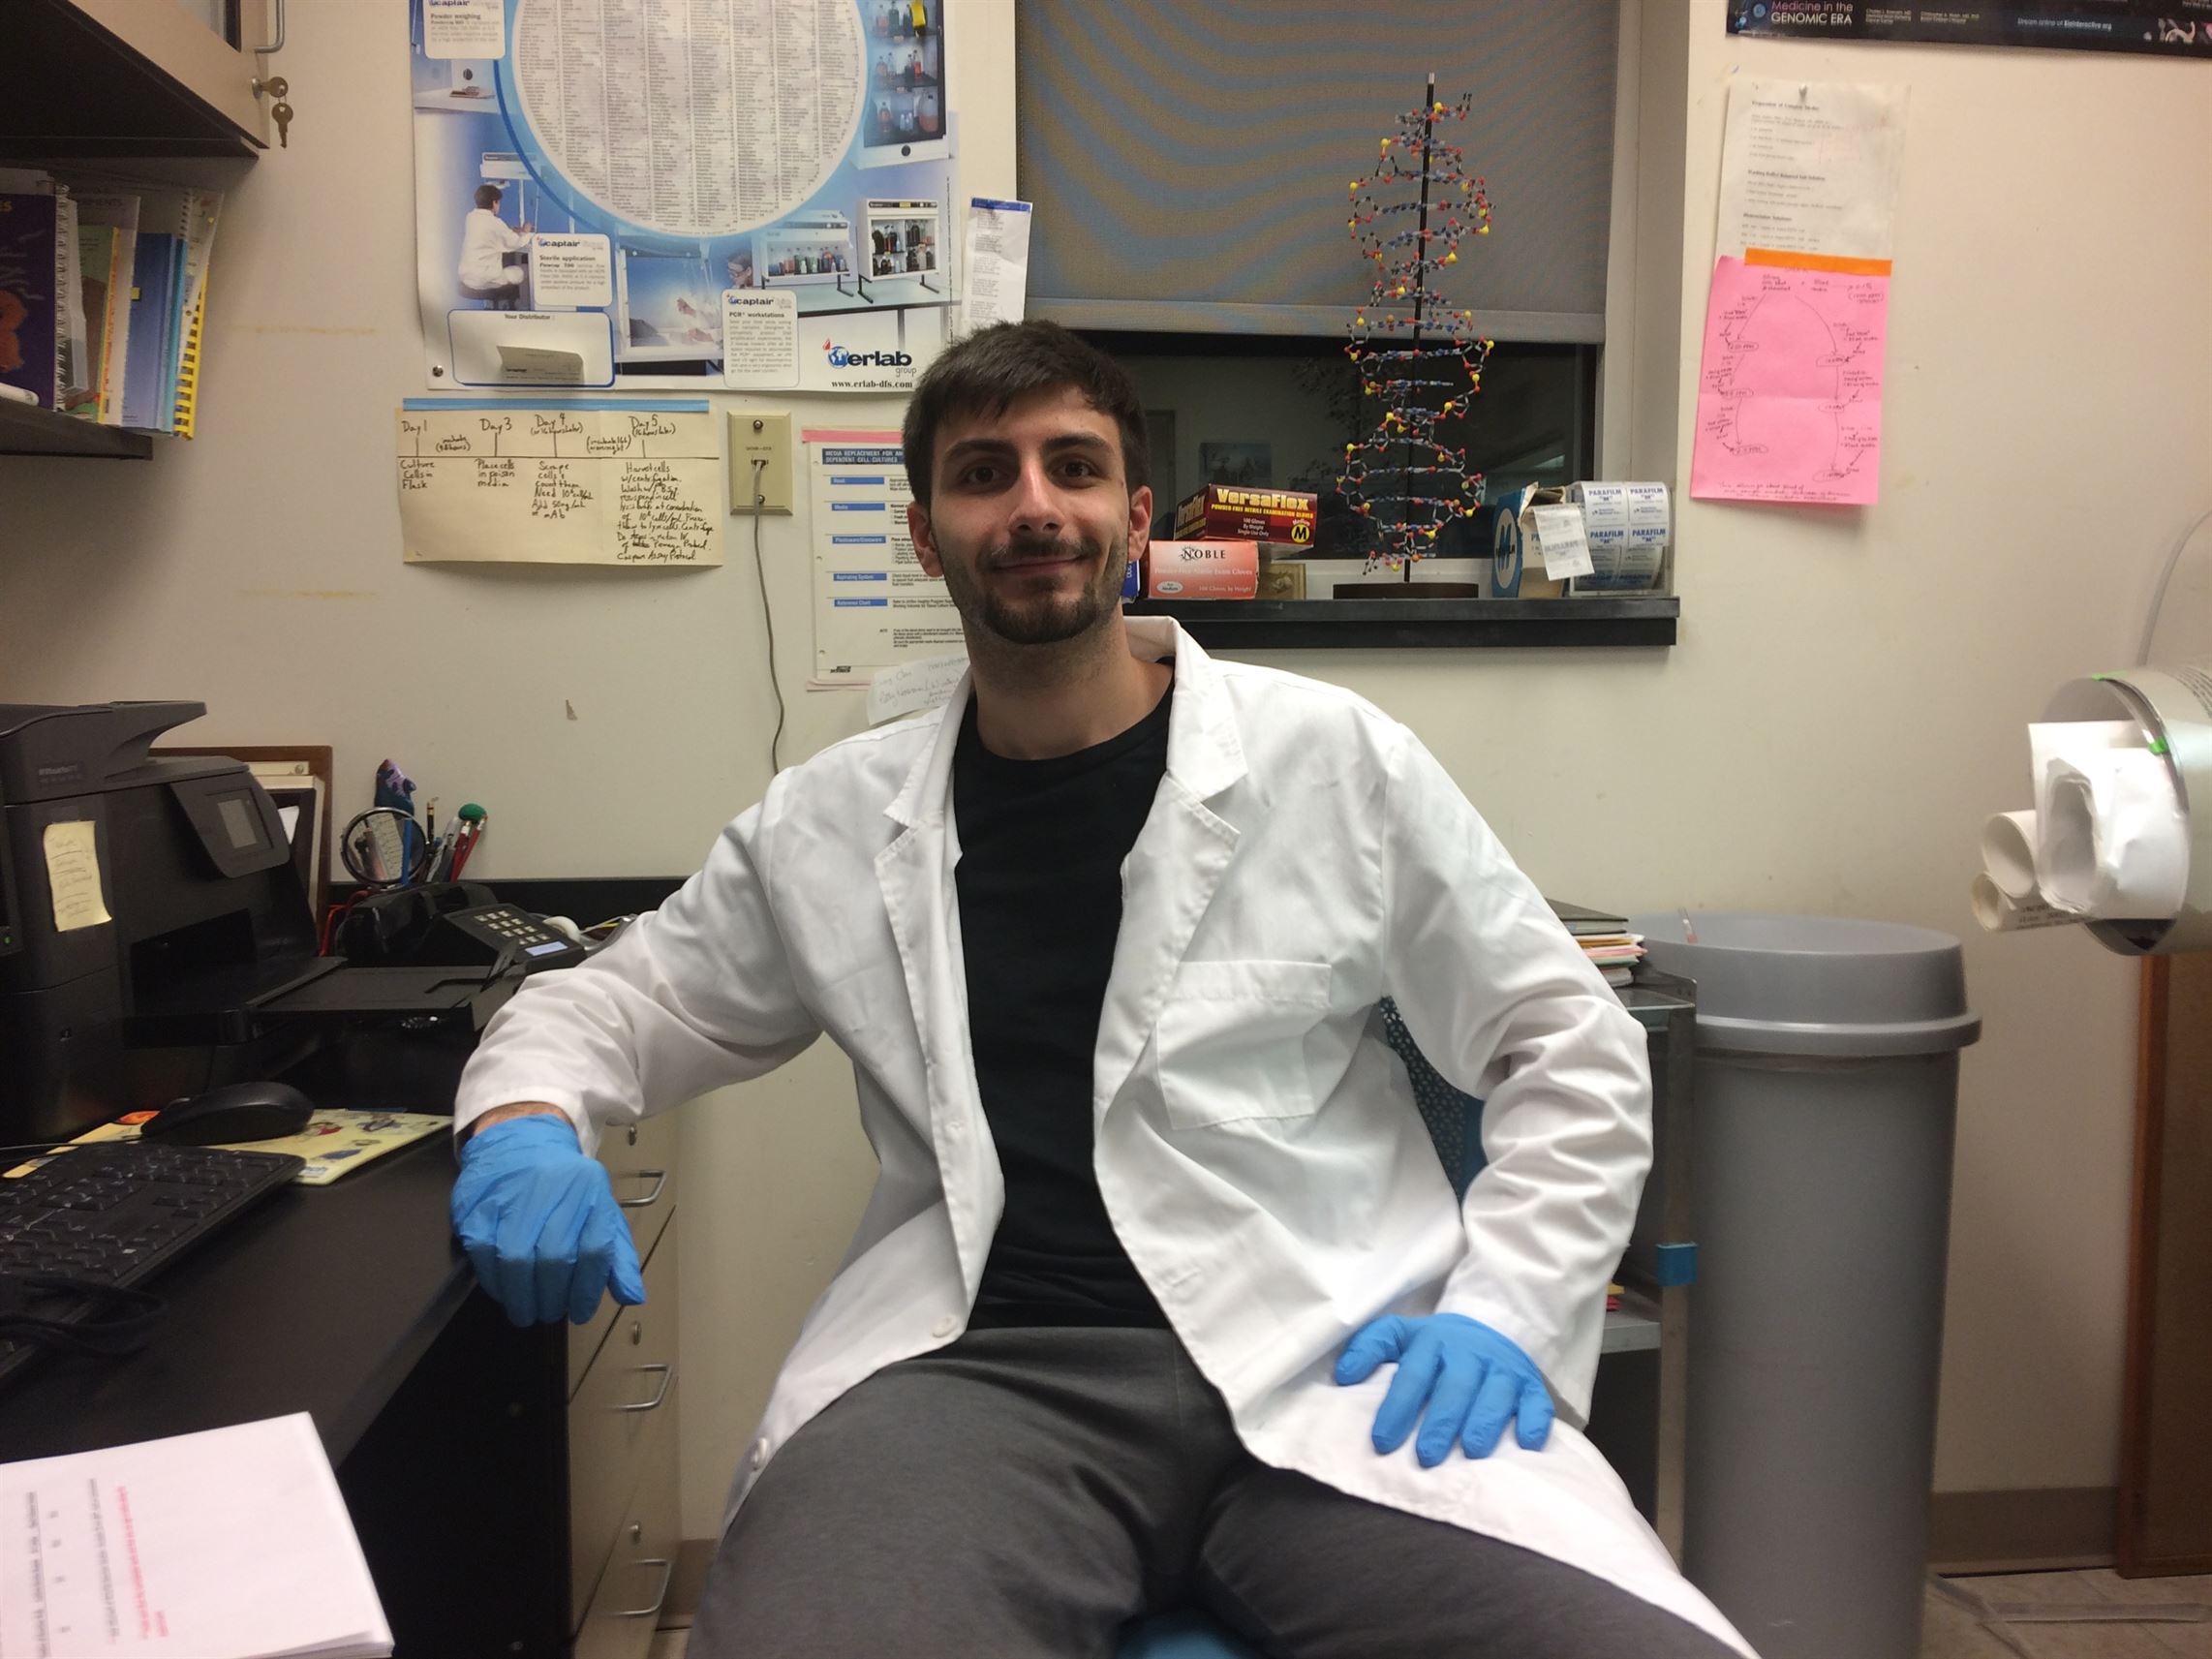 Zachary Bonelli, a senior biochemistry major, is Ezenwanne's research partner and right-hand man for this project. Sal DiMaggio | The Montclarion